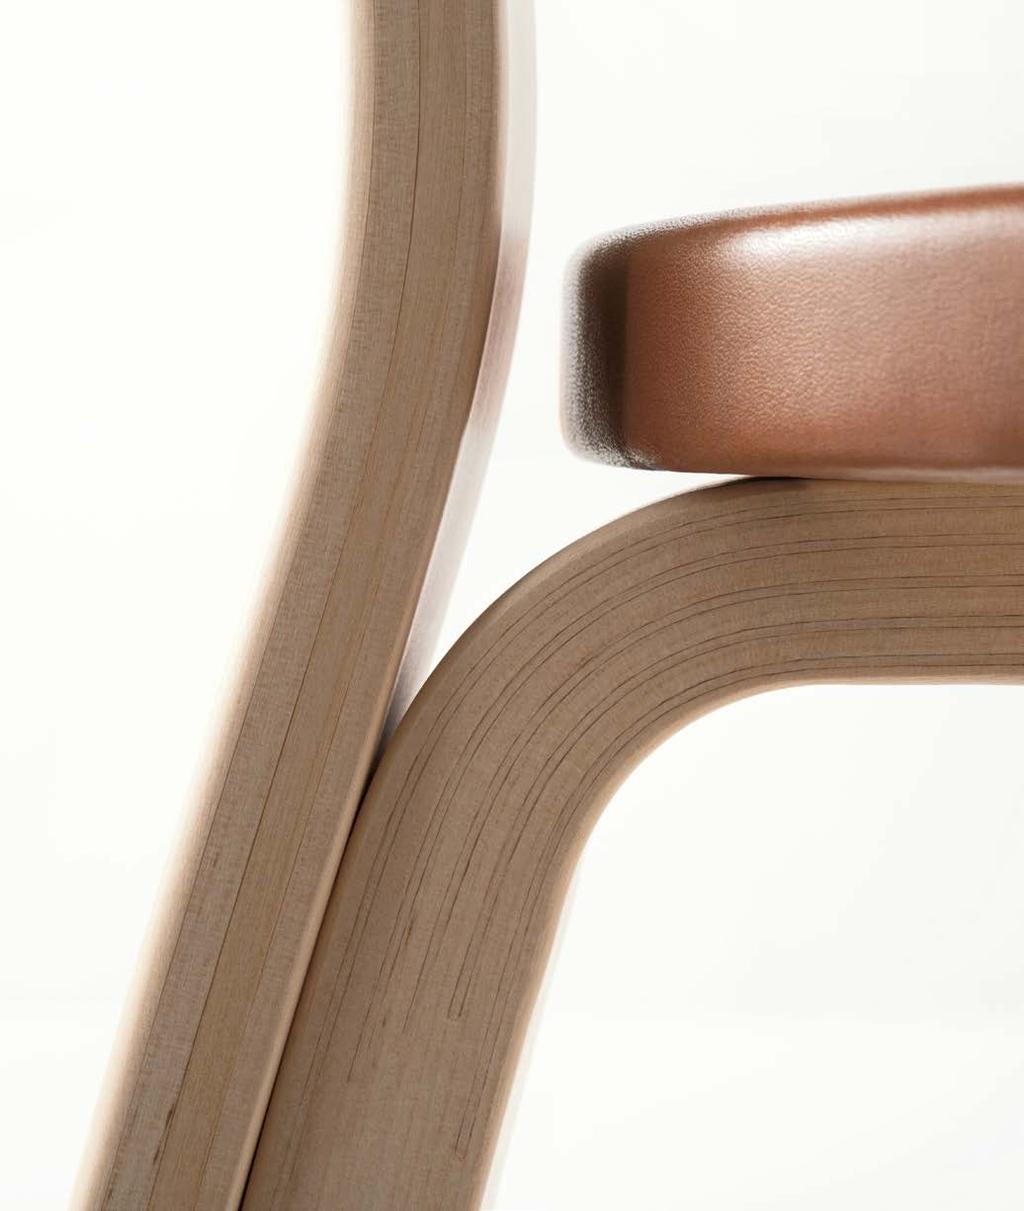 I n the late 1920s, the great Finnish architect Alvar Aalto began to experiment with bending wood and collaborated with the furniture manufacturer Otto Korhonen on a number of innovative techniques.